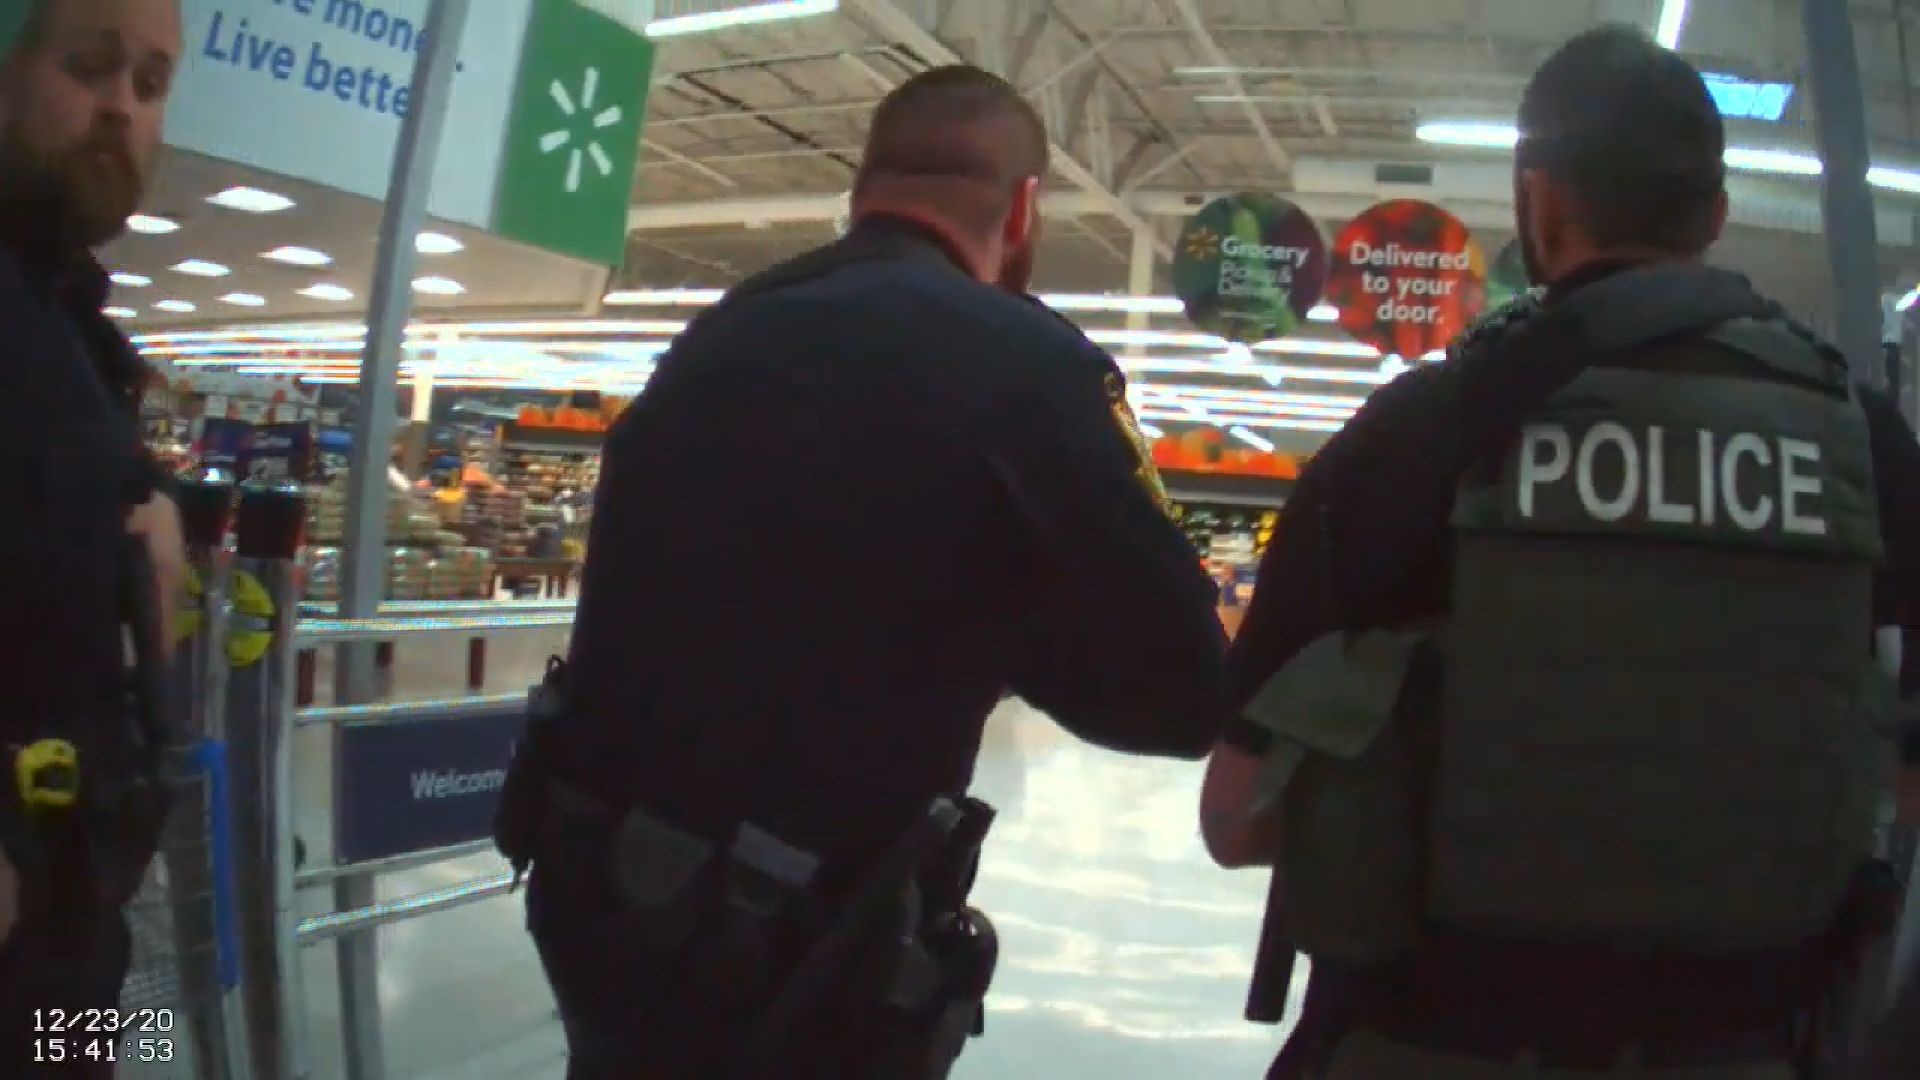 Two days before Christmas 2020, officers responded to a packed Walmart on the Parkway in Sevierville after reports of an active shooting. This is what they found.